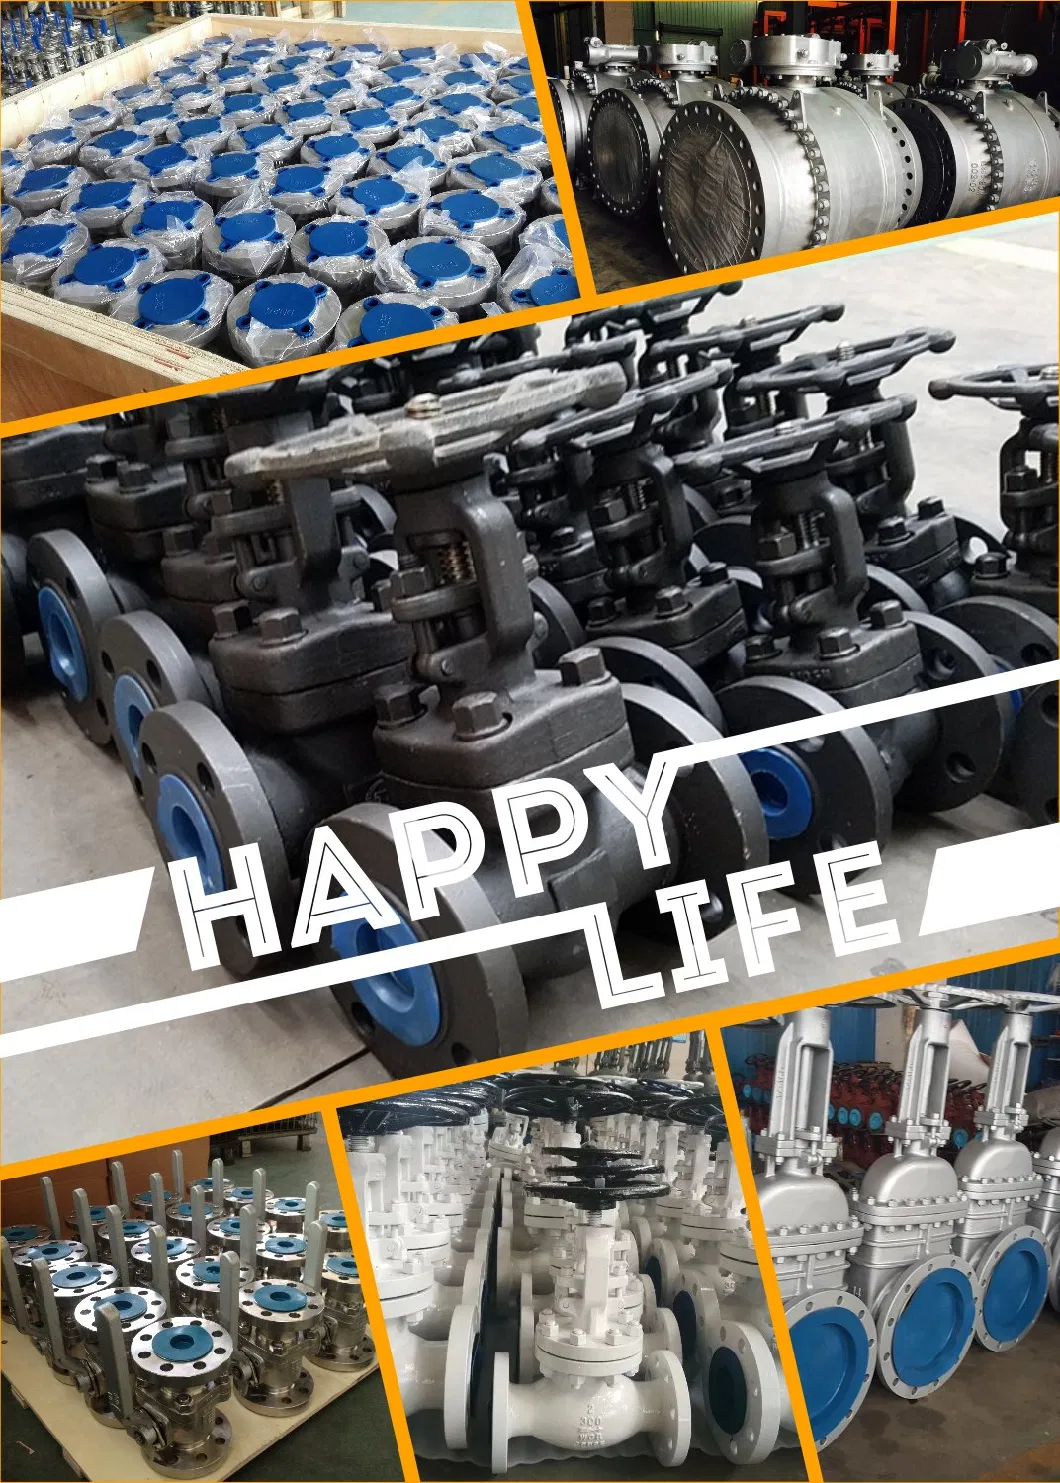 DIN/GB/GOST/BS1868 OEM Carbon/Stainless Steel Pn16/25/40 Flanged RF/Welded Bevel Gear Box Electric/Pneumatic/Hydraulic Industrial Oil Gas Water OS&Y Globe Valve